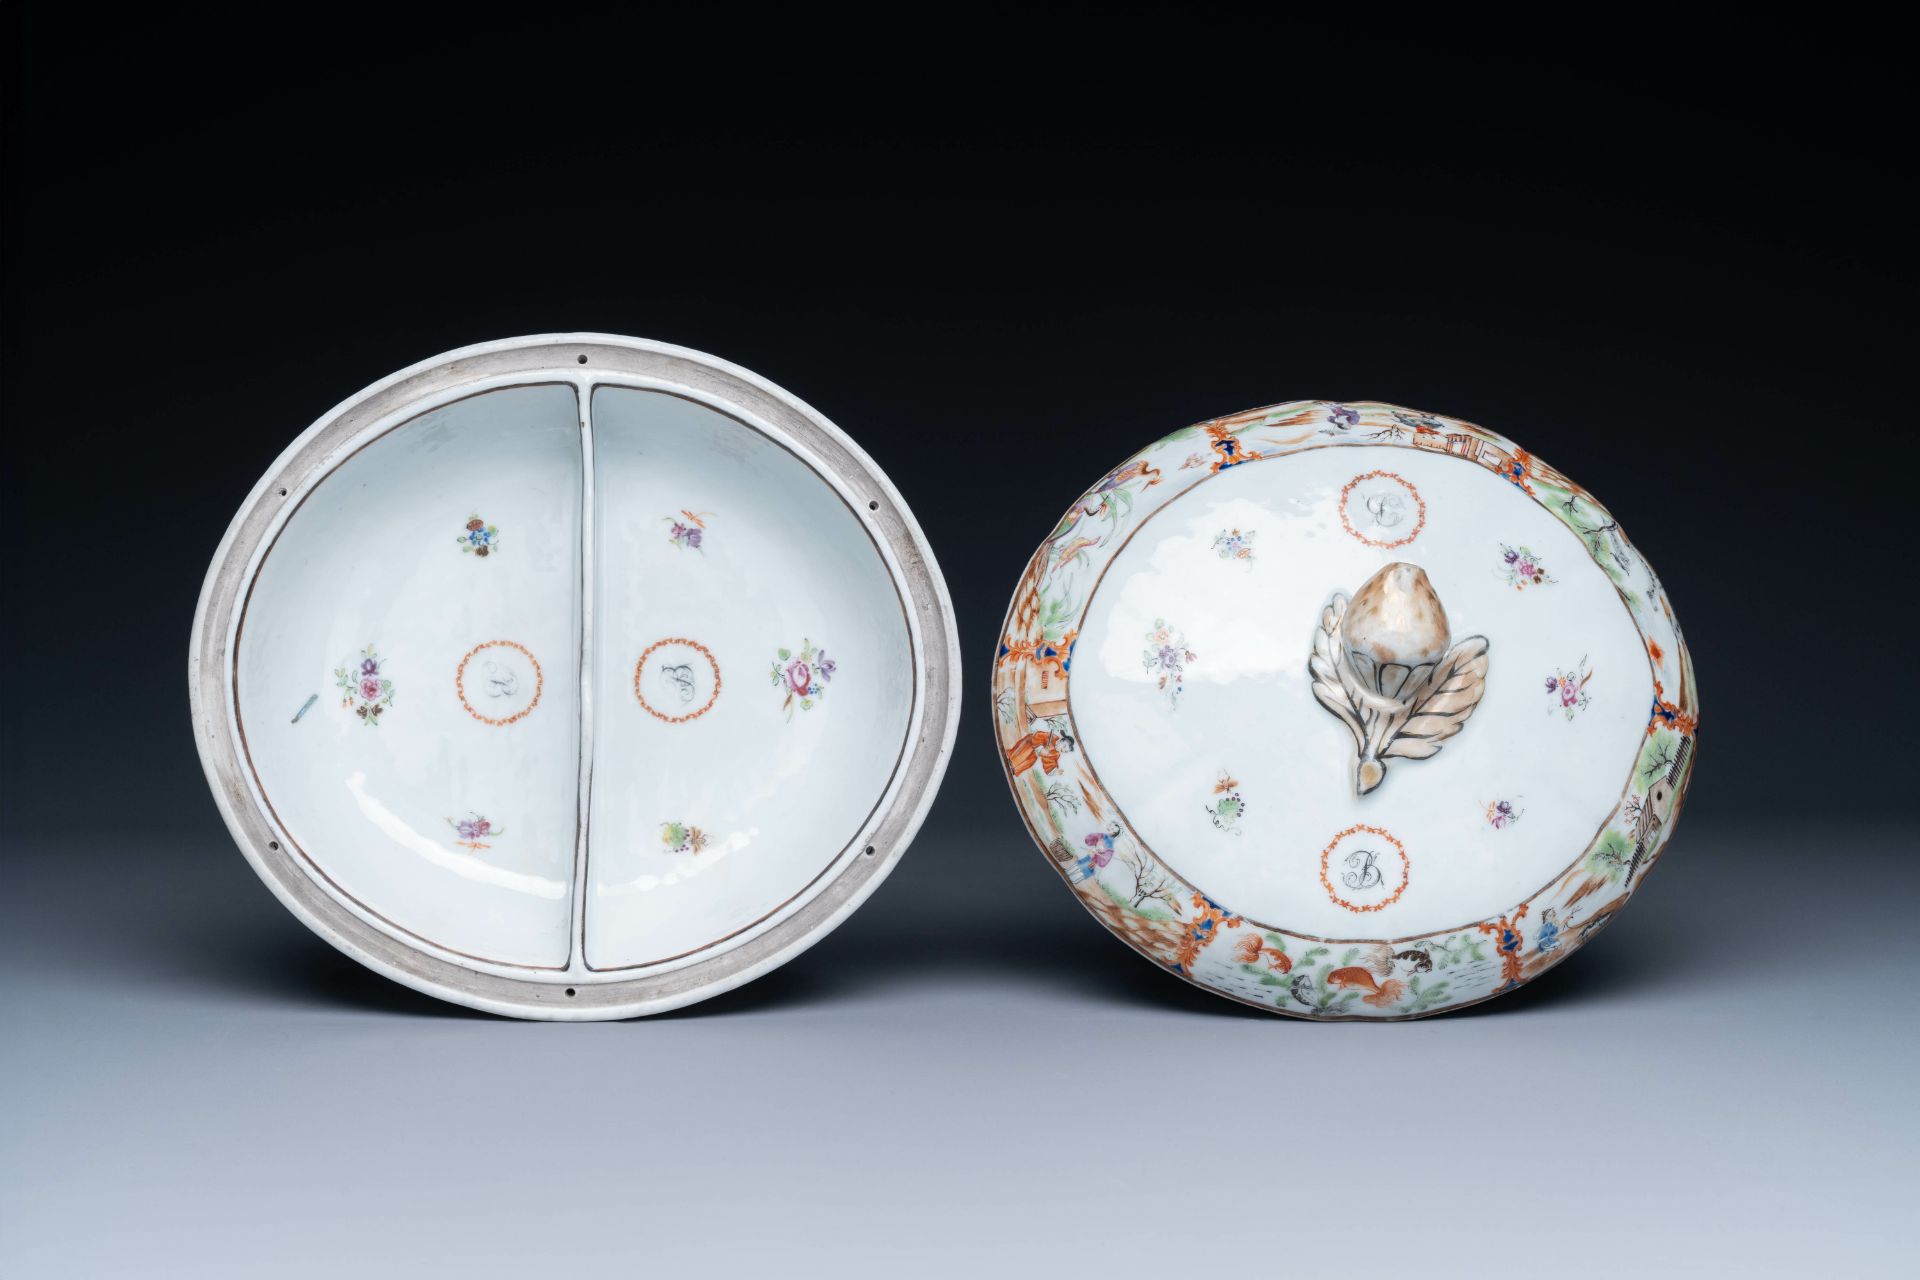 A Chinese Canton famille rose tureen with two compartments and a monogrammed plate, 19th C. - Image 4 of 5